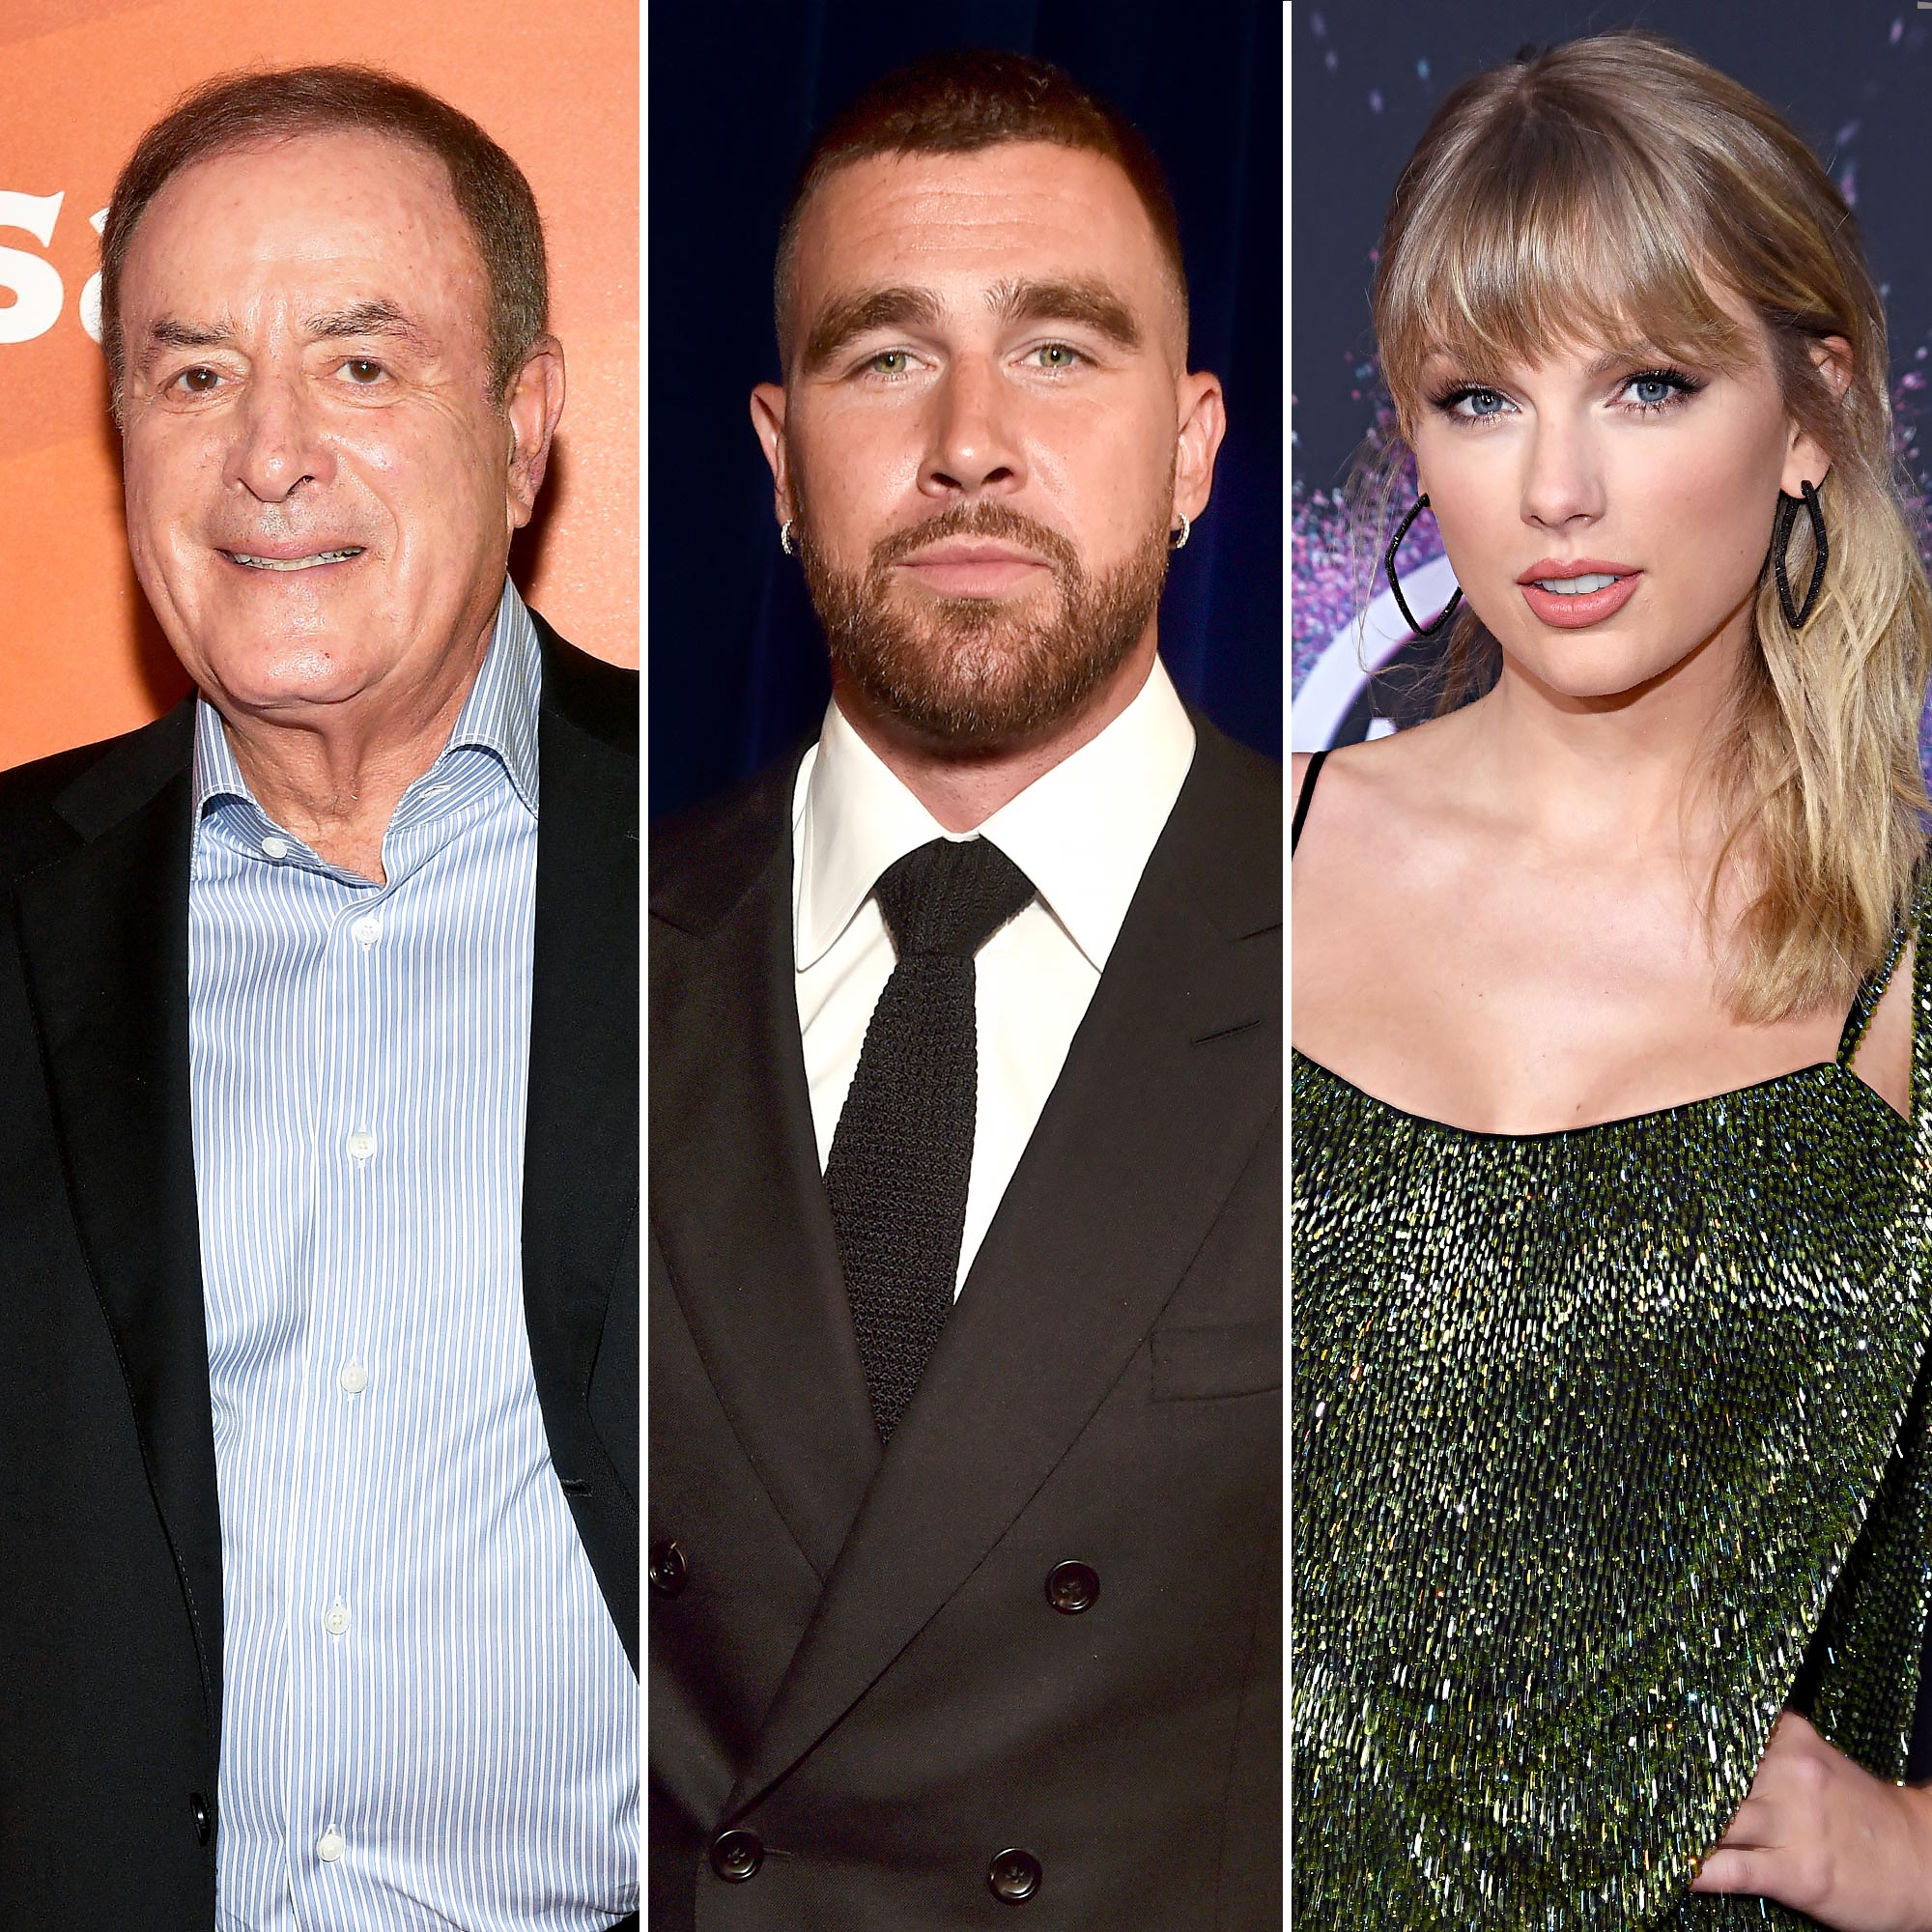 Sportscaster Al Michaels Thought Travis Kelce Would ‘Beat Him Up’ If He Called Taylor Swift His 'Fiancee'